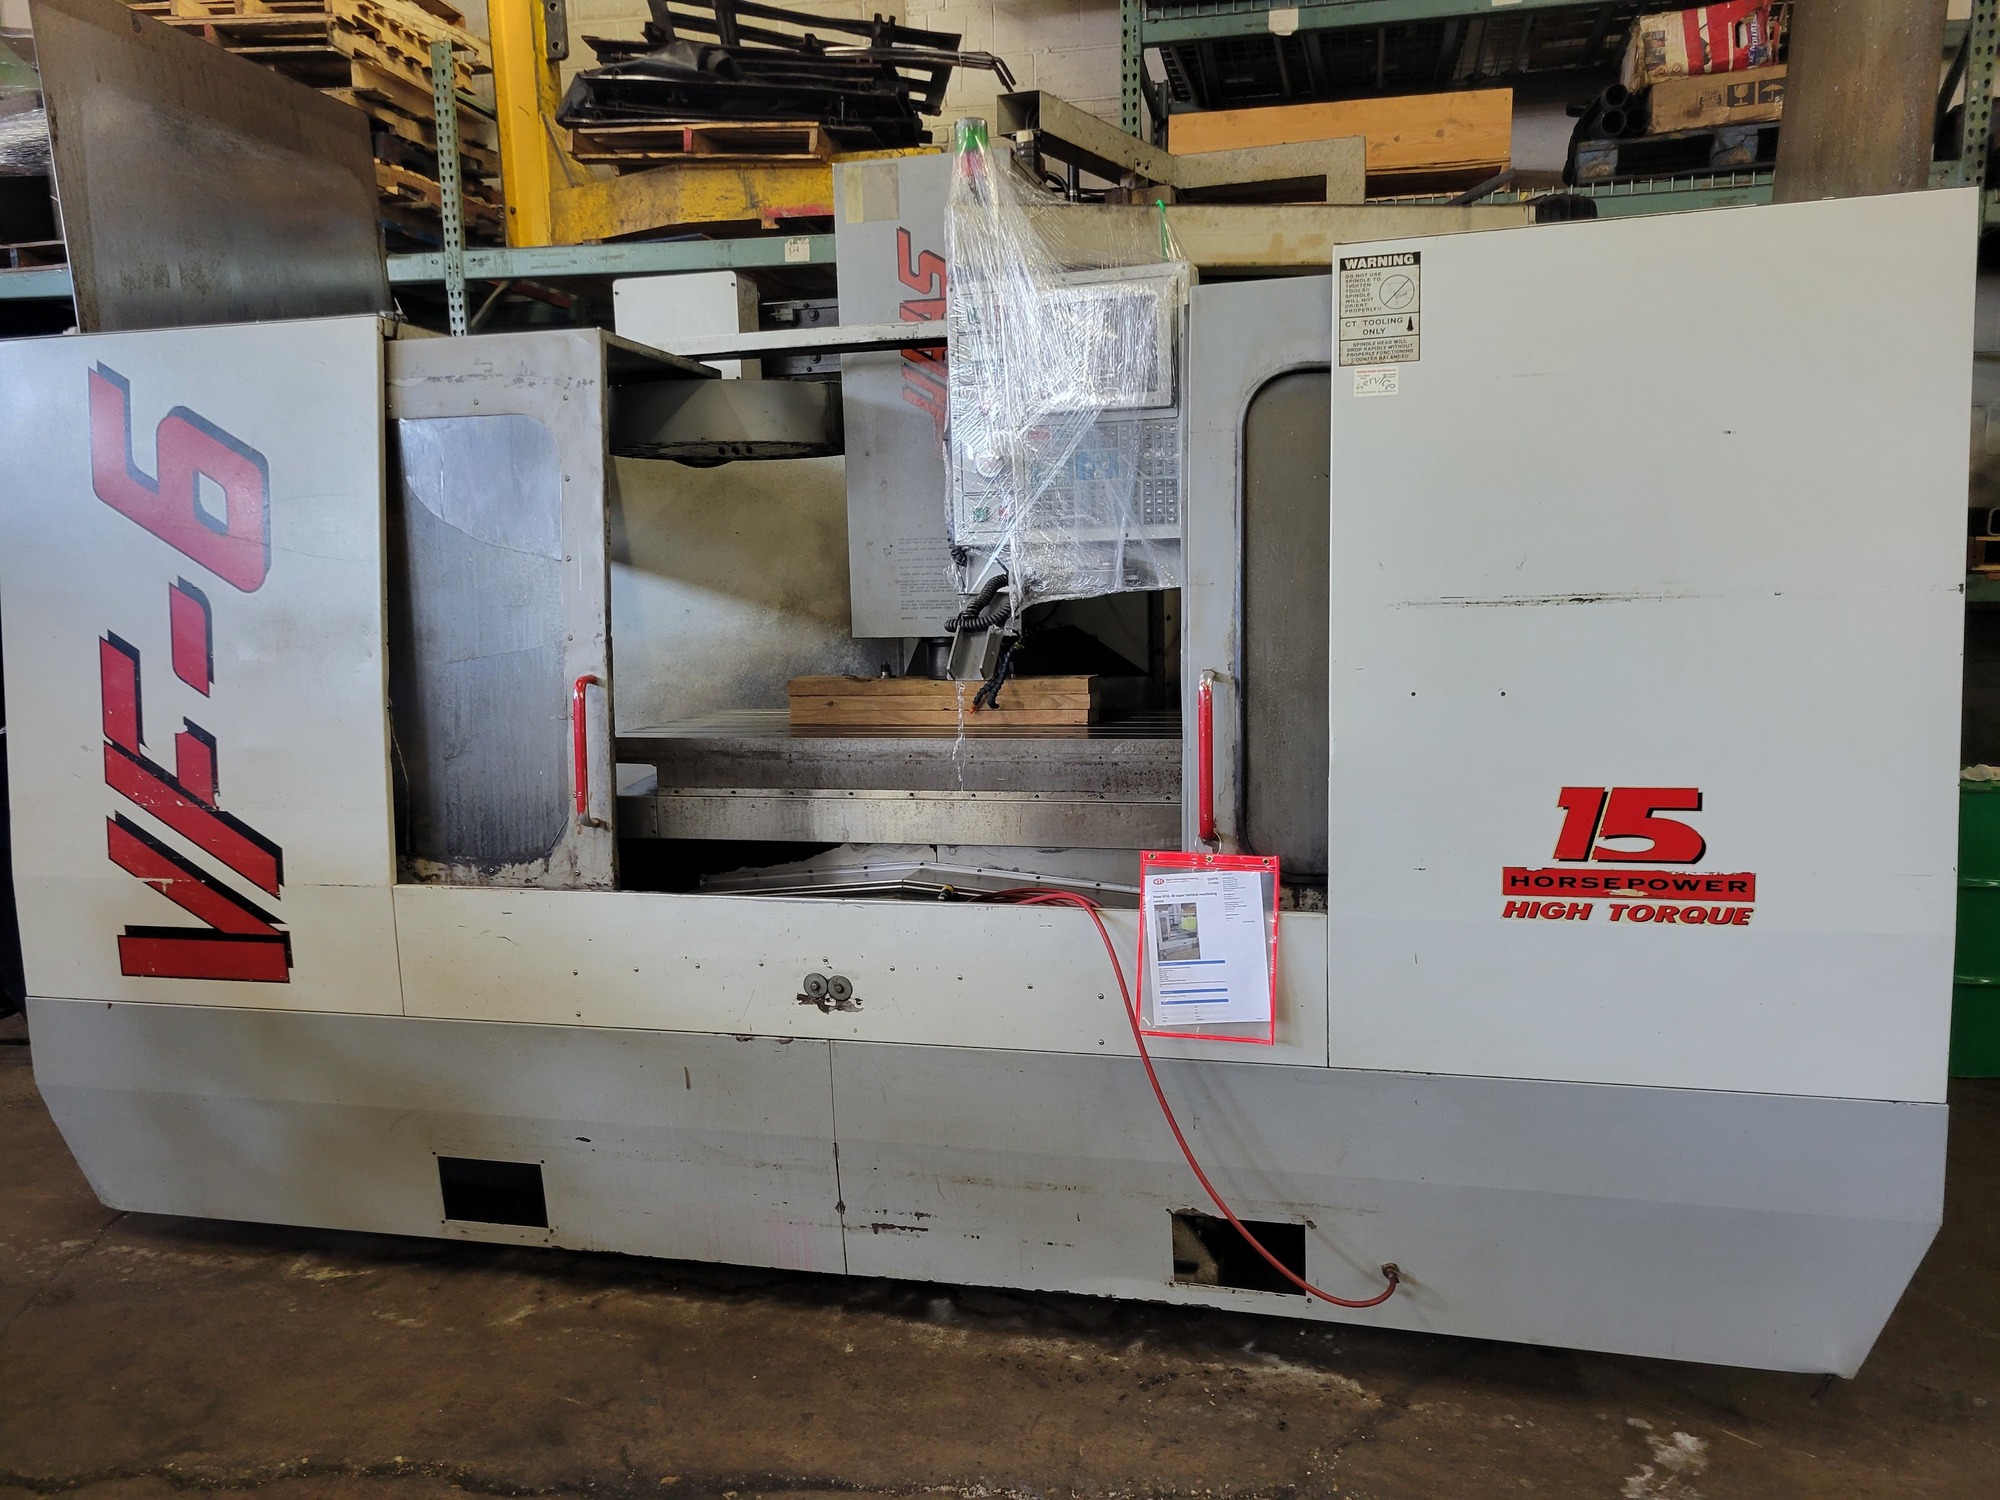 HAAS VF-6 Vertical Machining Centers with Pallets | Myers Technology Co., LLC